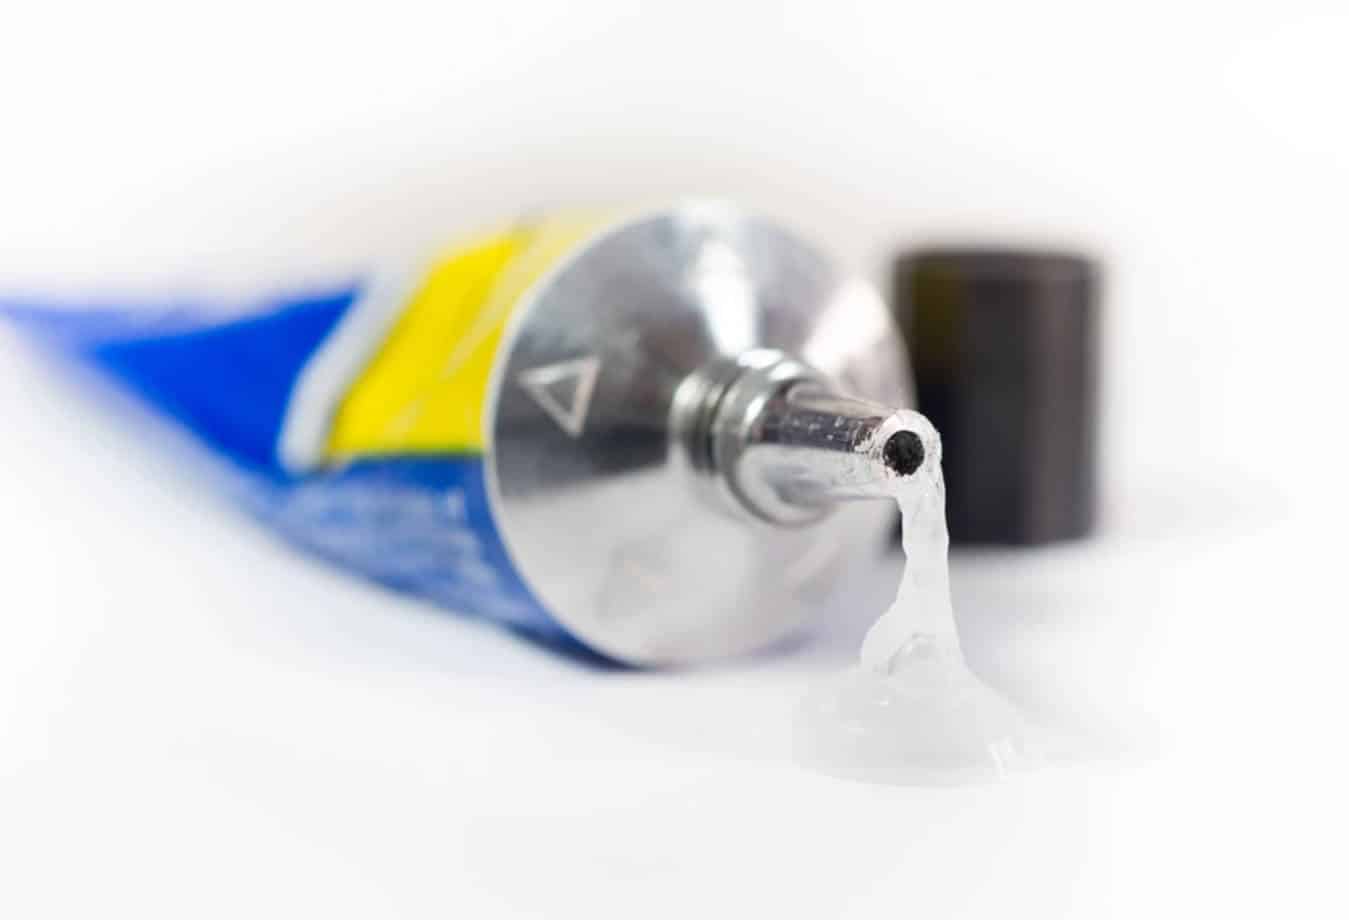 What You Need to Know About Super Glue